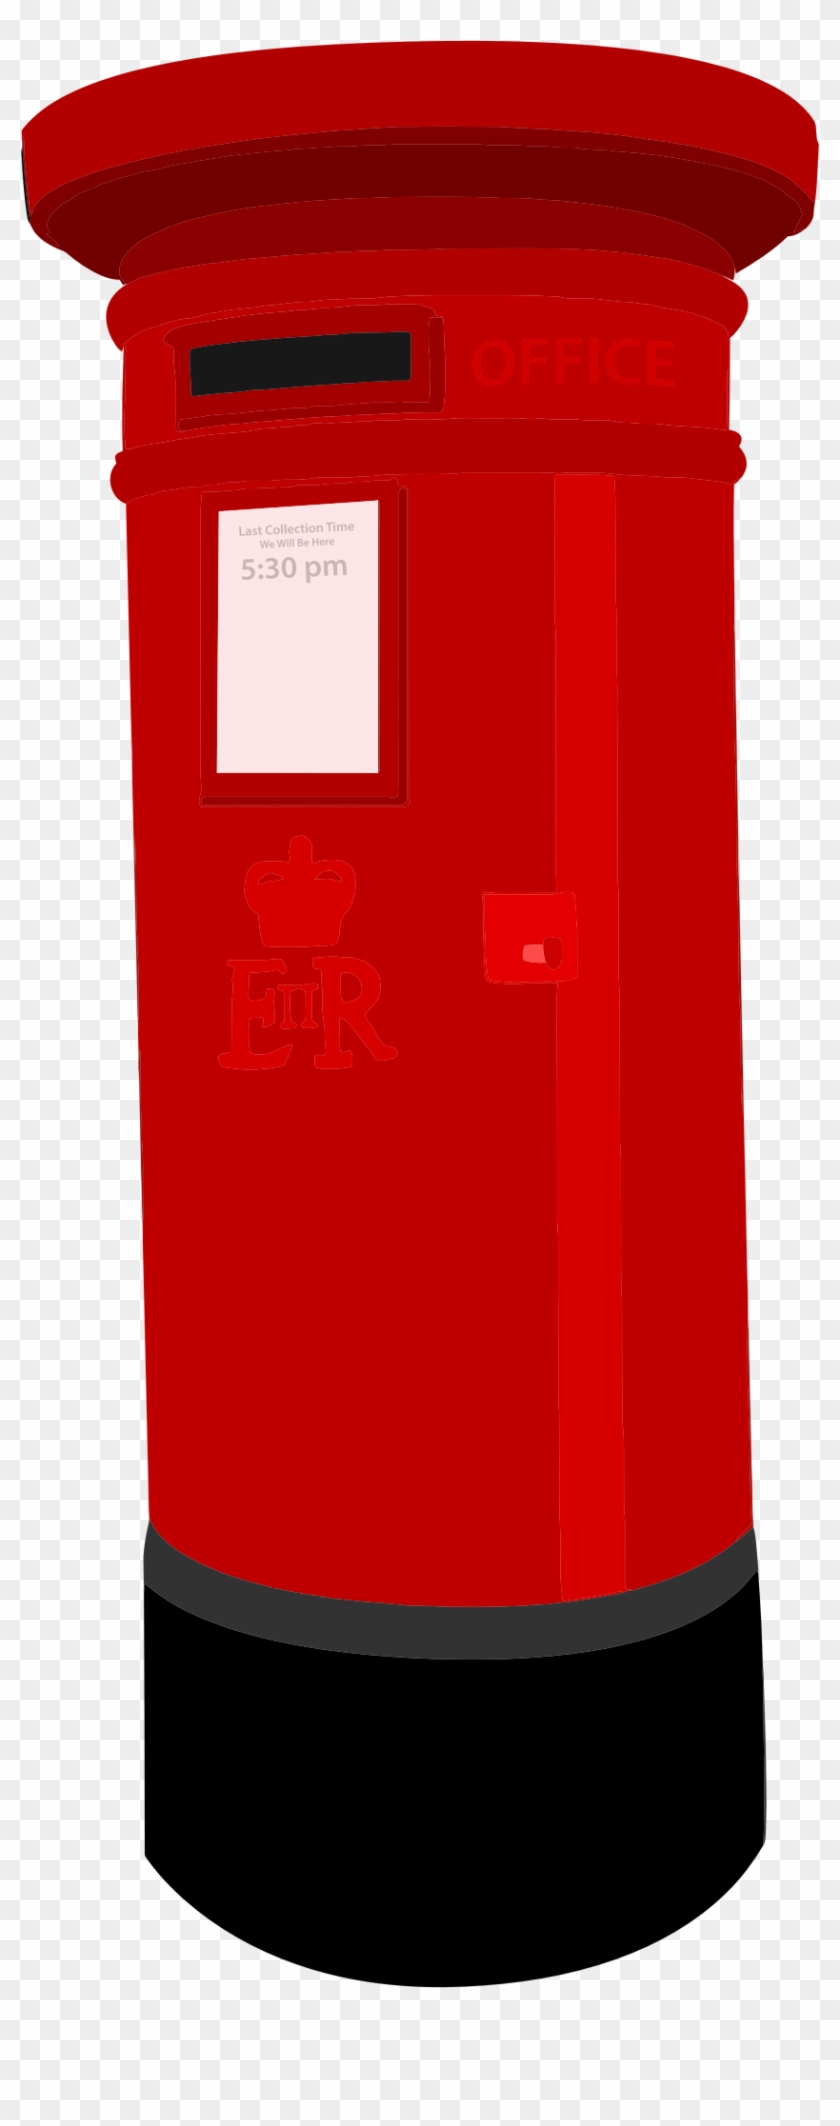 Delightful Post Office Pictures Clip Art Medium Size - Red Post Box Clipart #336867